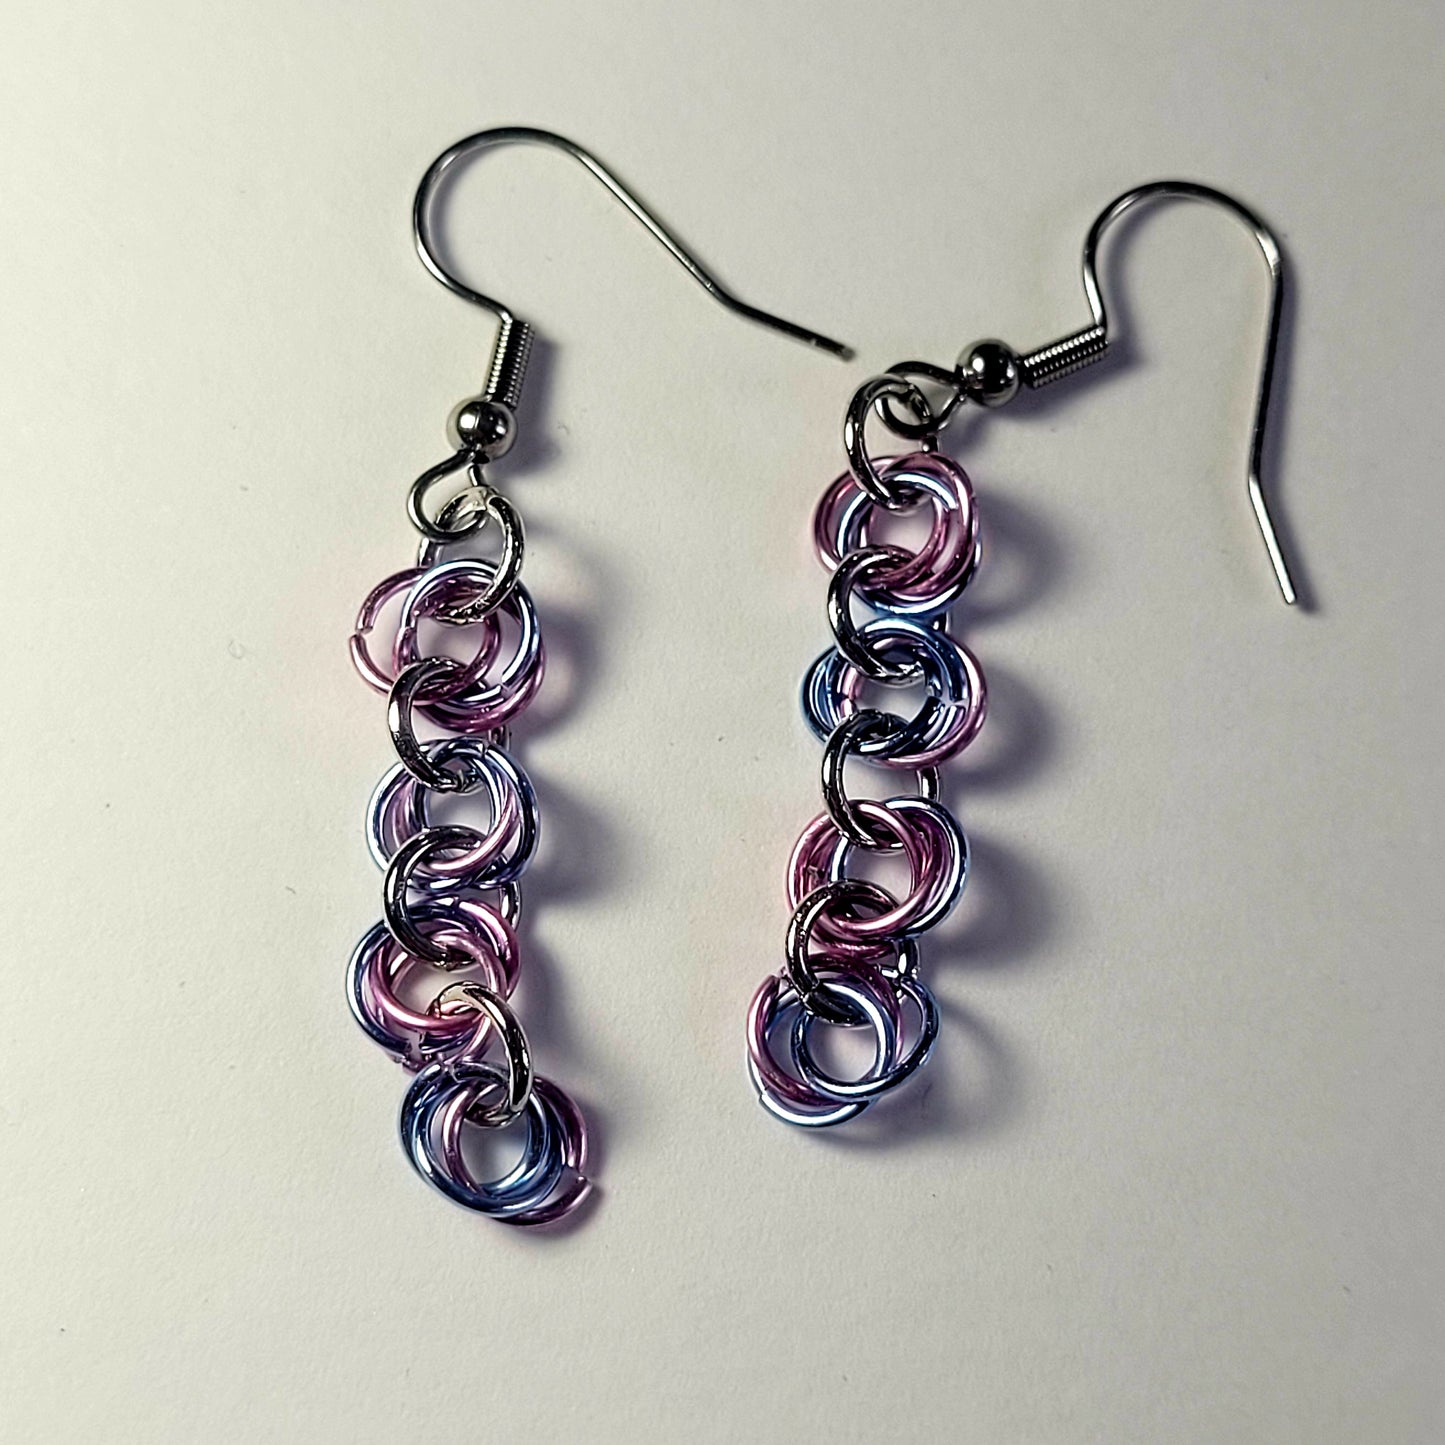 Earrings, light pink, light blue and silver chainmail